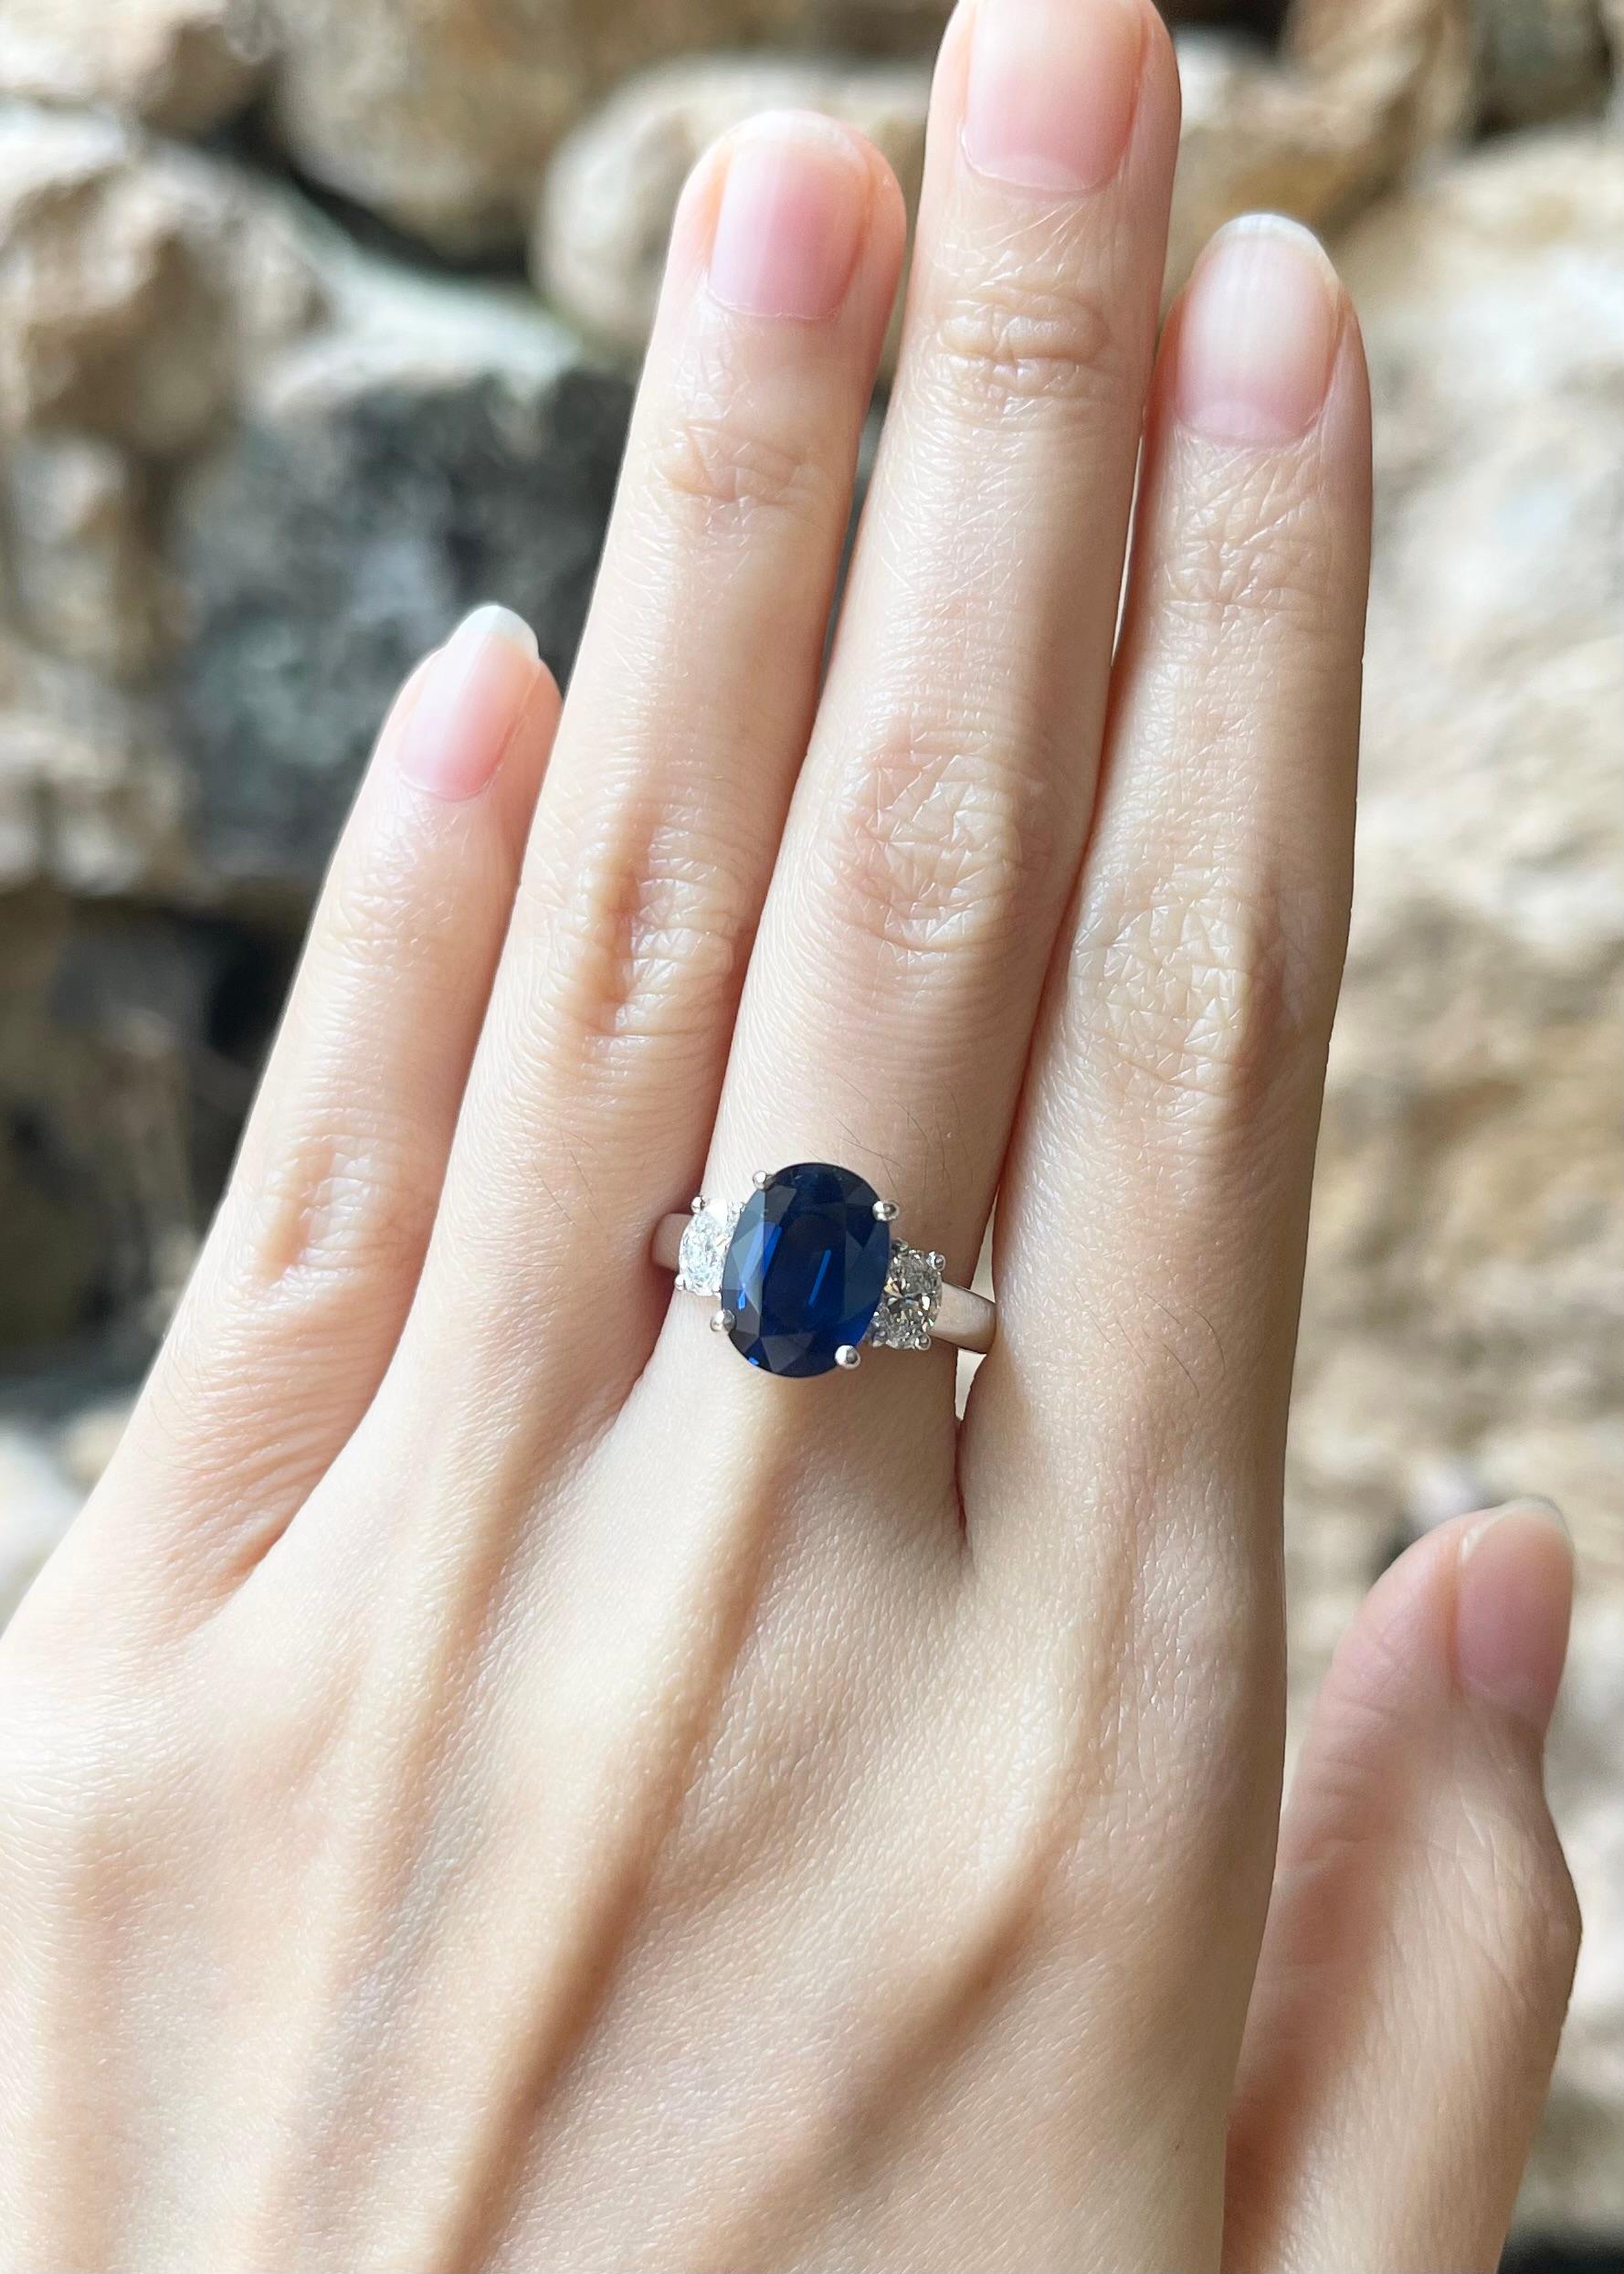 Blue Sapphire 3.89 carats with Diamond 0.60 carat Ring set in Platinum 950 Settings
(GIA Certified)

Width:  1.4 cm 
Length: 1.1 cm
Ring Size: 53
Total Weight: 7.96 grams

Blue Sapphire 
Width:  0.8 cm 
Length: 1.1 cm

